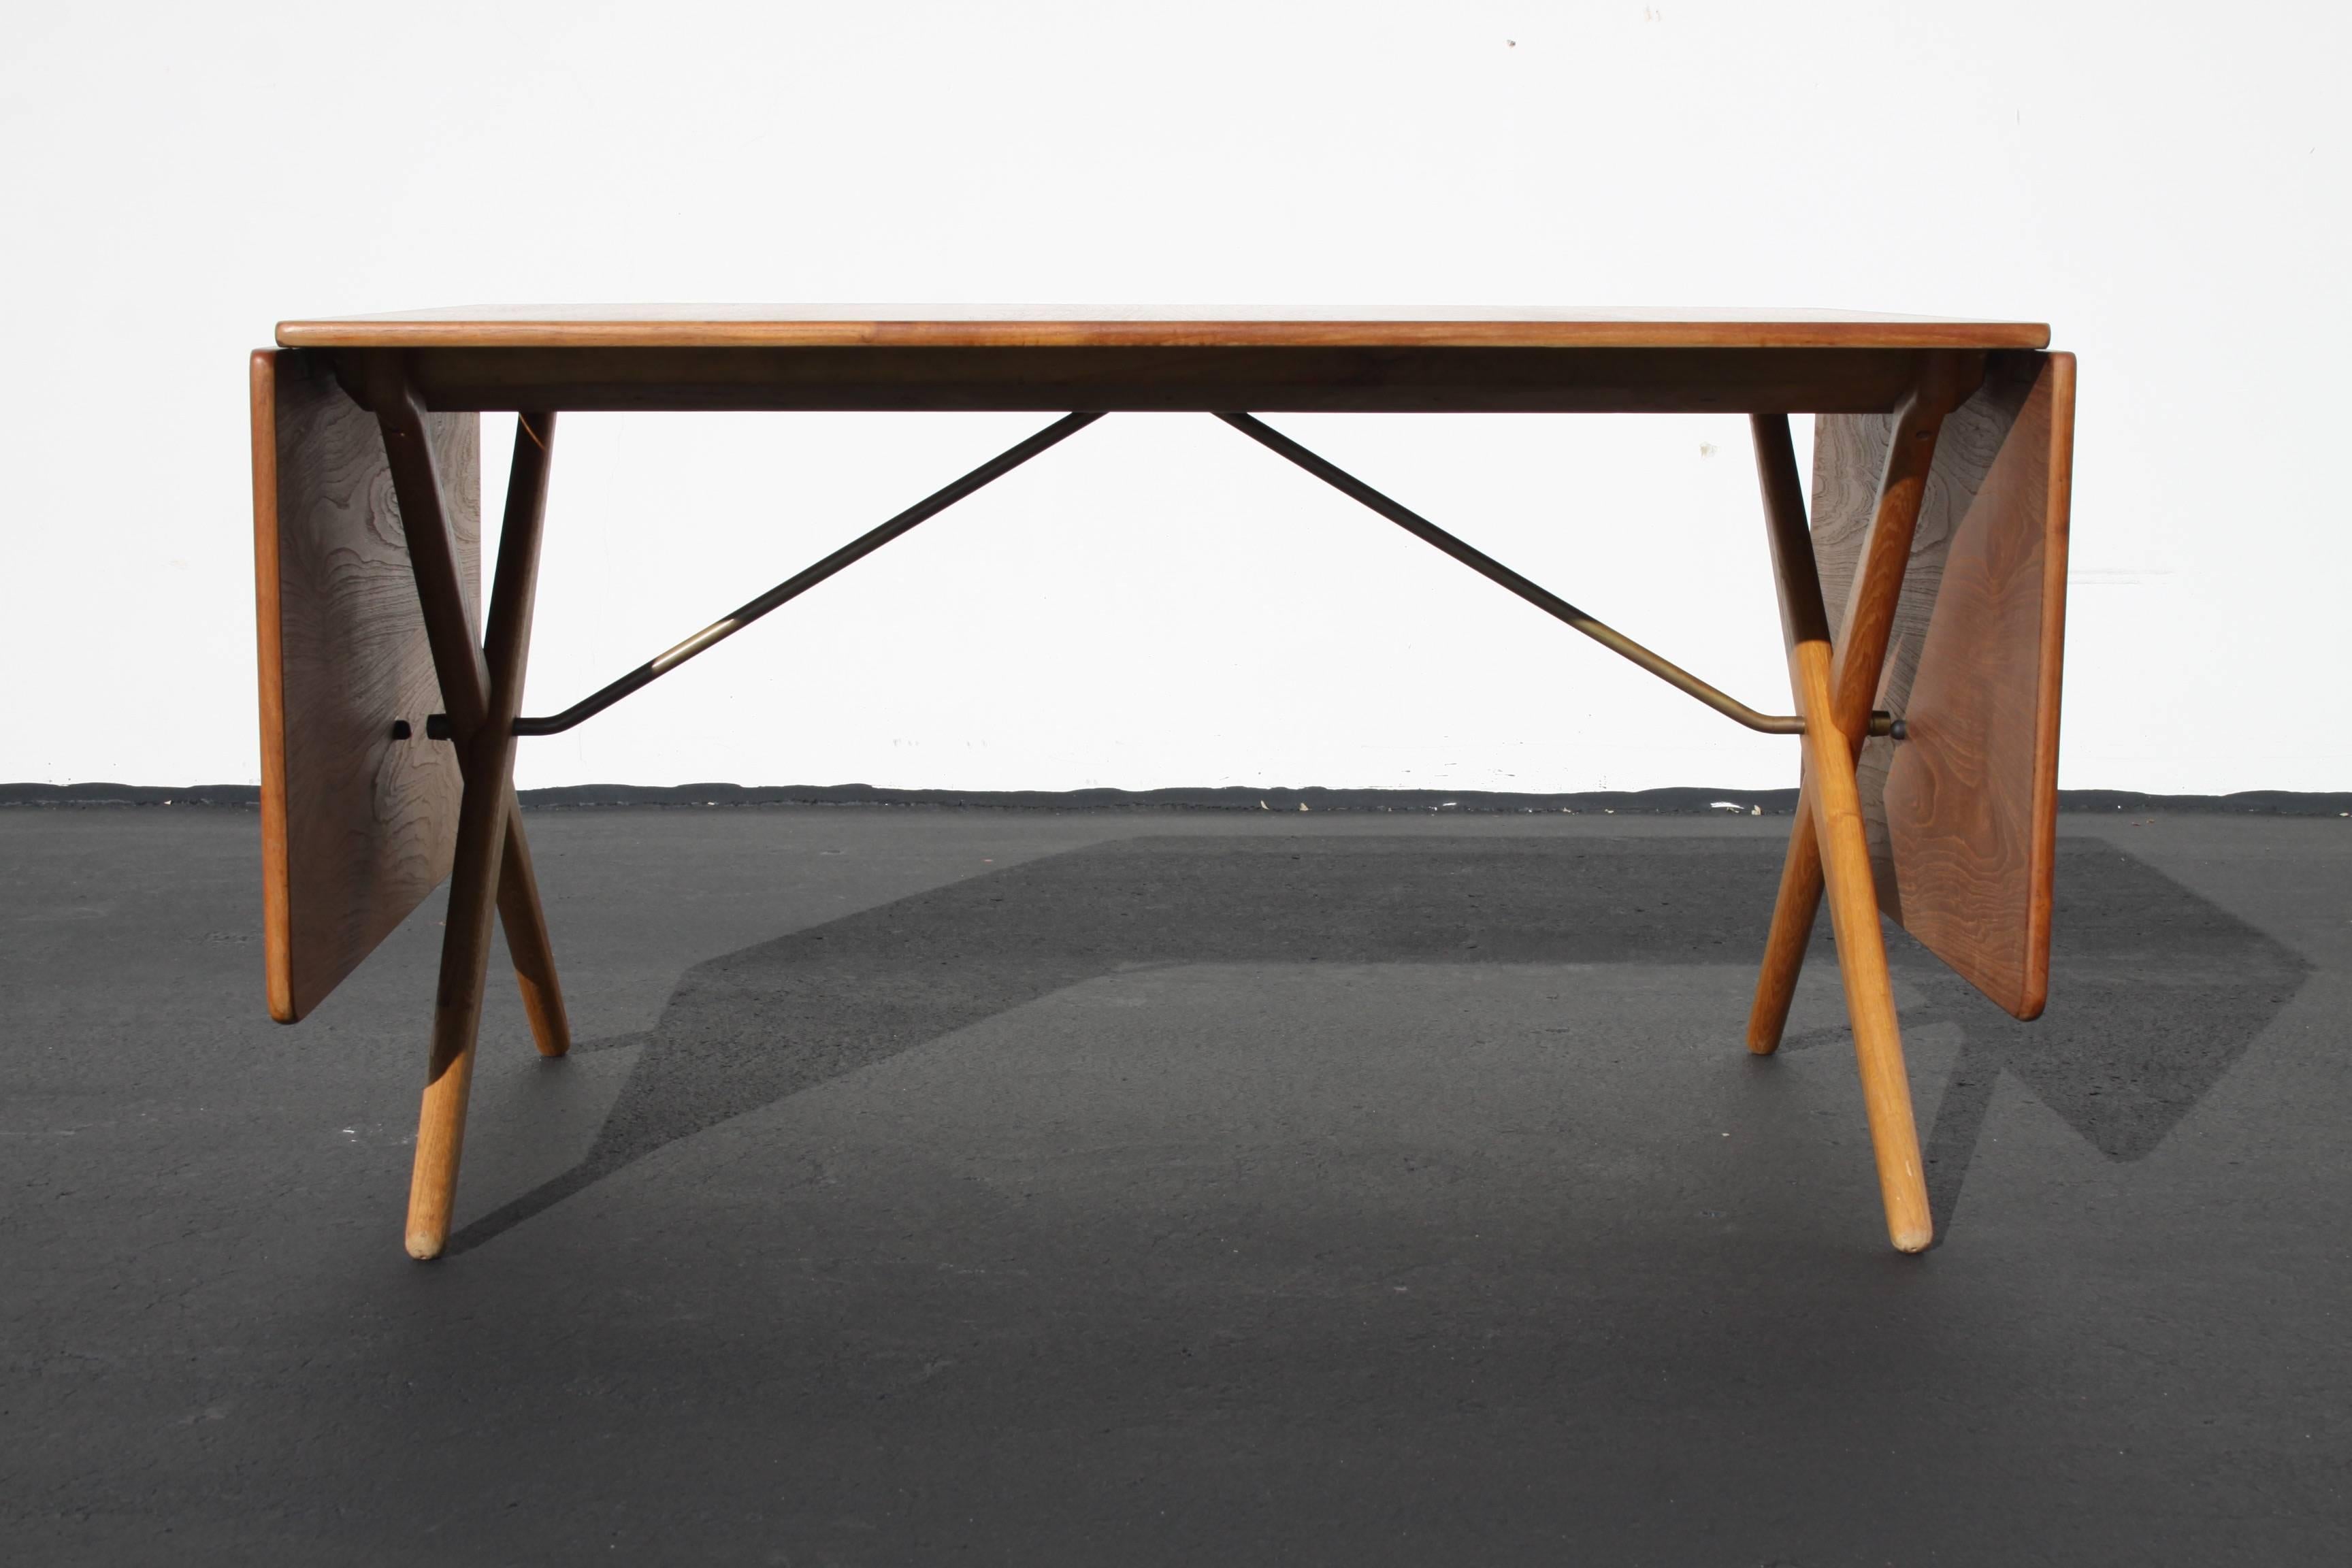 Vintage Danish modern Hans Wegner model AT-309 teak and oak drop leaf dining table. Beautifully restored top and X-legs with great original patina to the brass. Stamped with makers mark Fabrikat: Andreas Tuck, Arkitekt: Hans J. Wegner Denmark. Fully